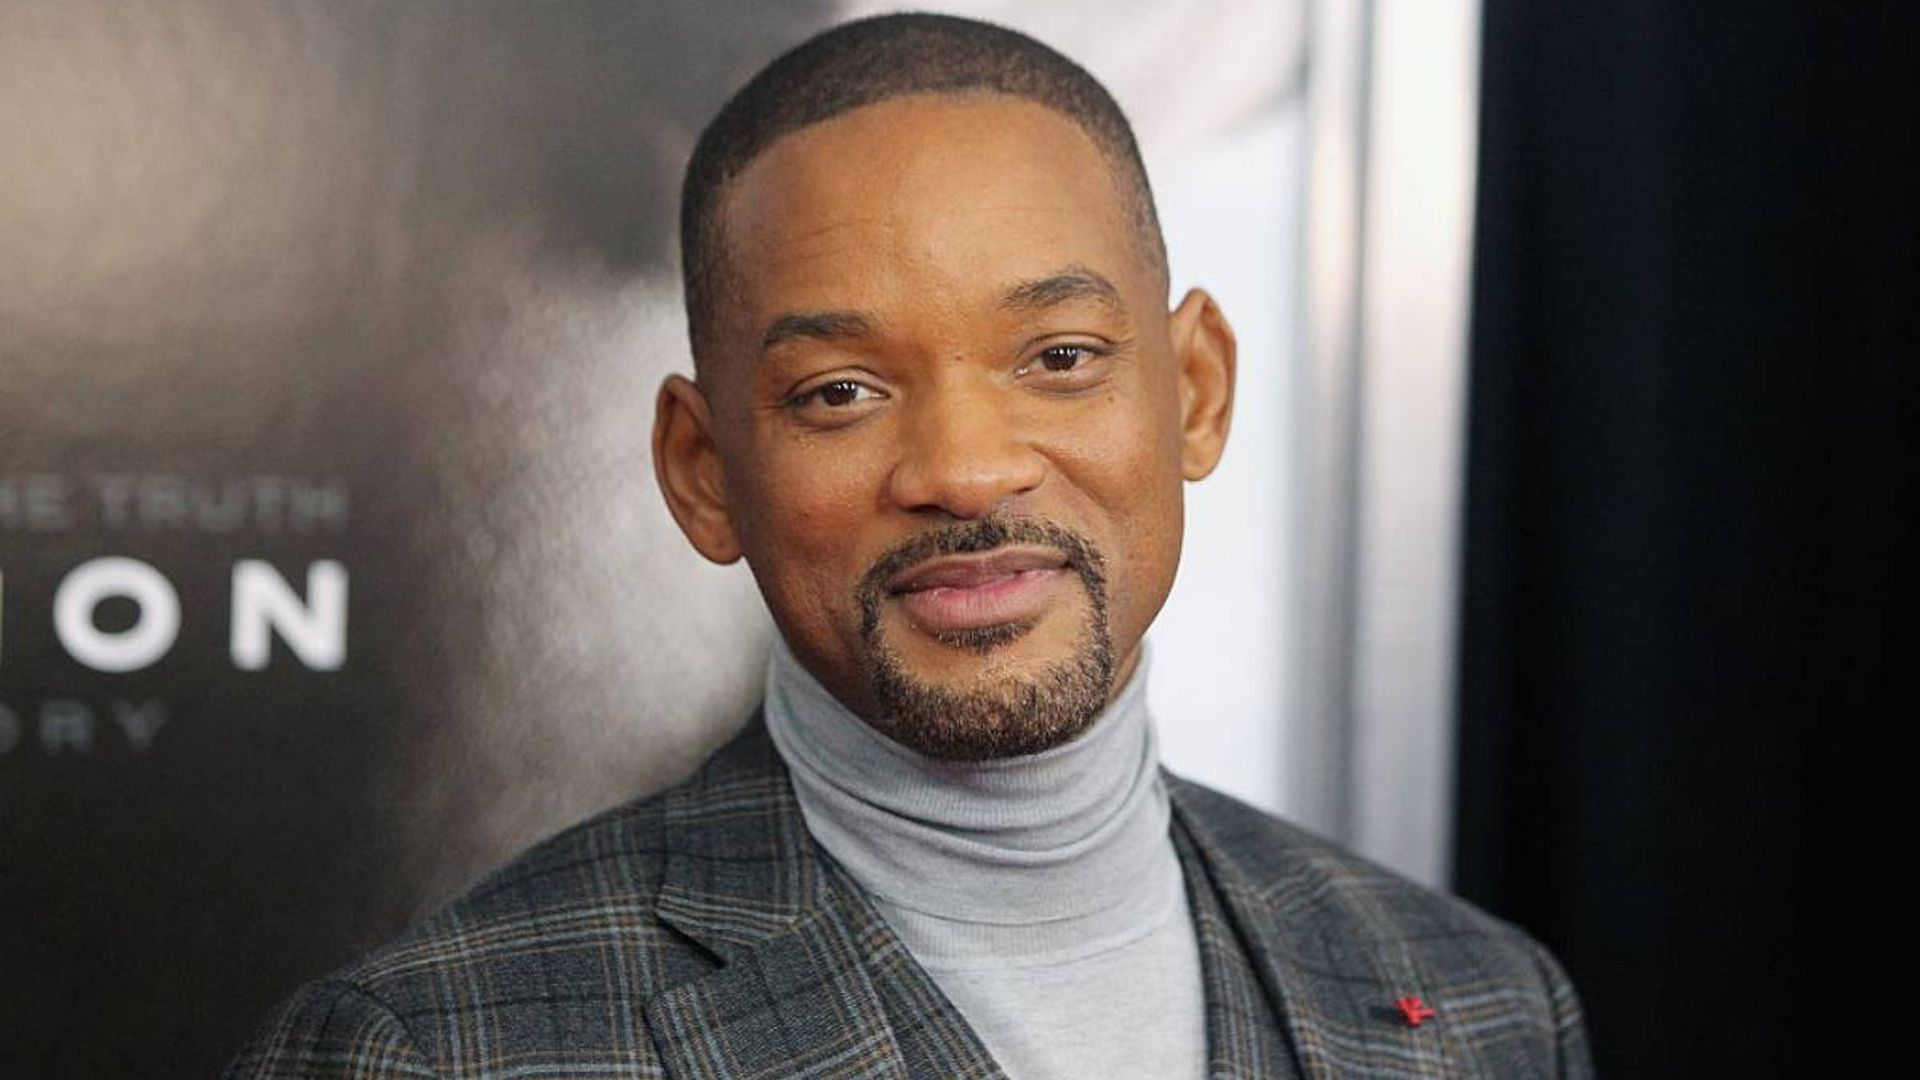 Will Smith causes a stir as fans don't recognize him during UK appearance